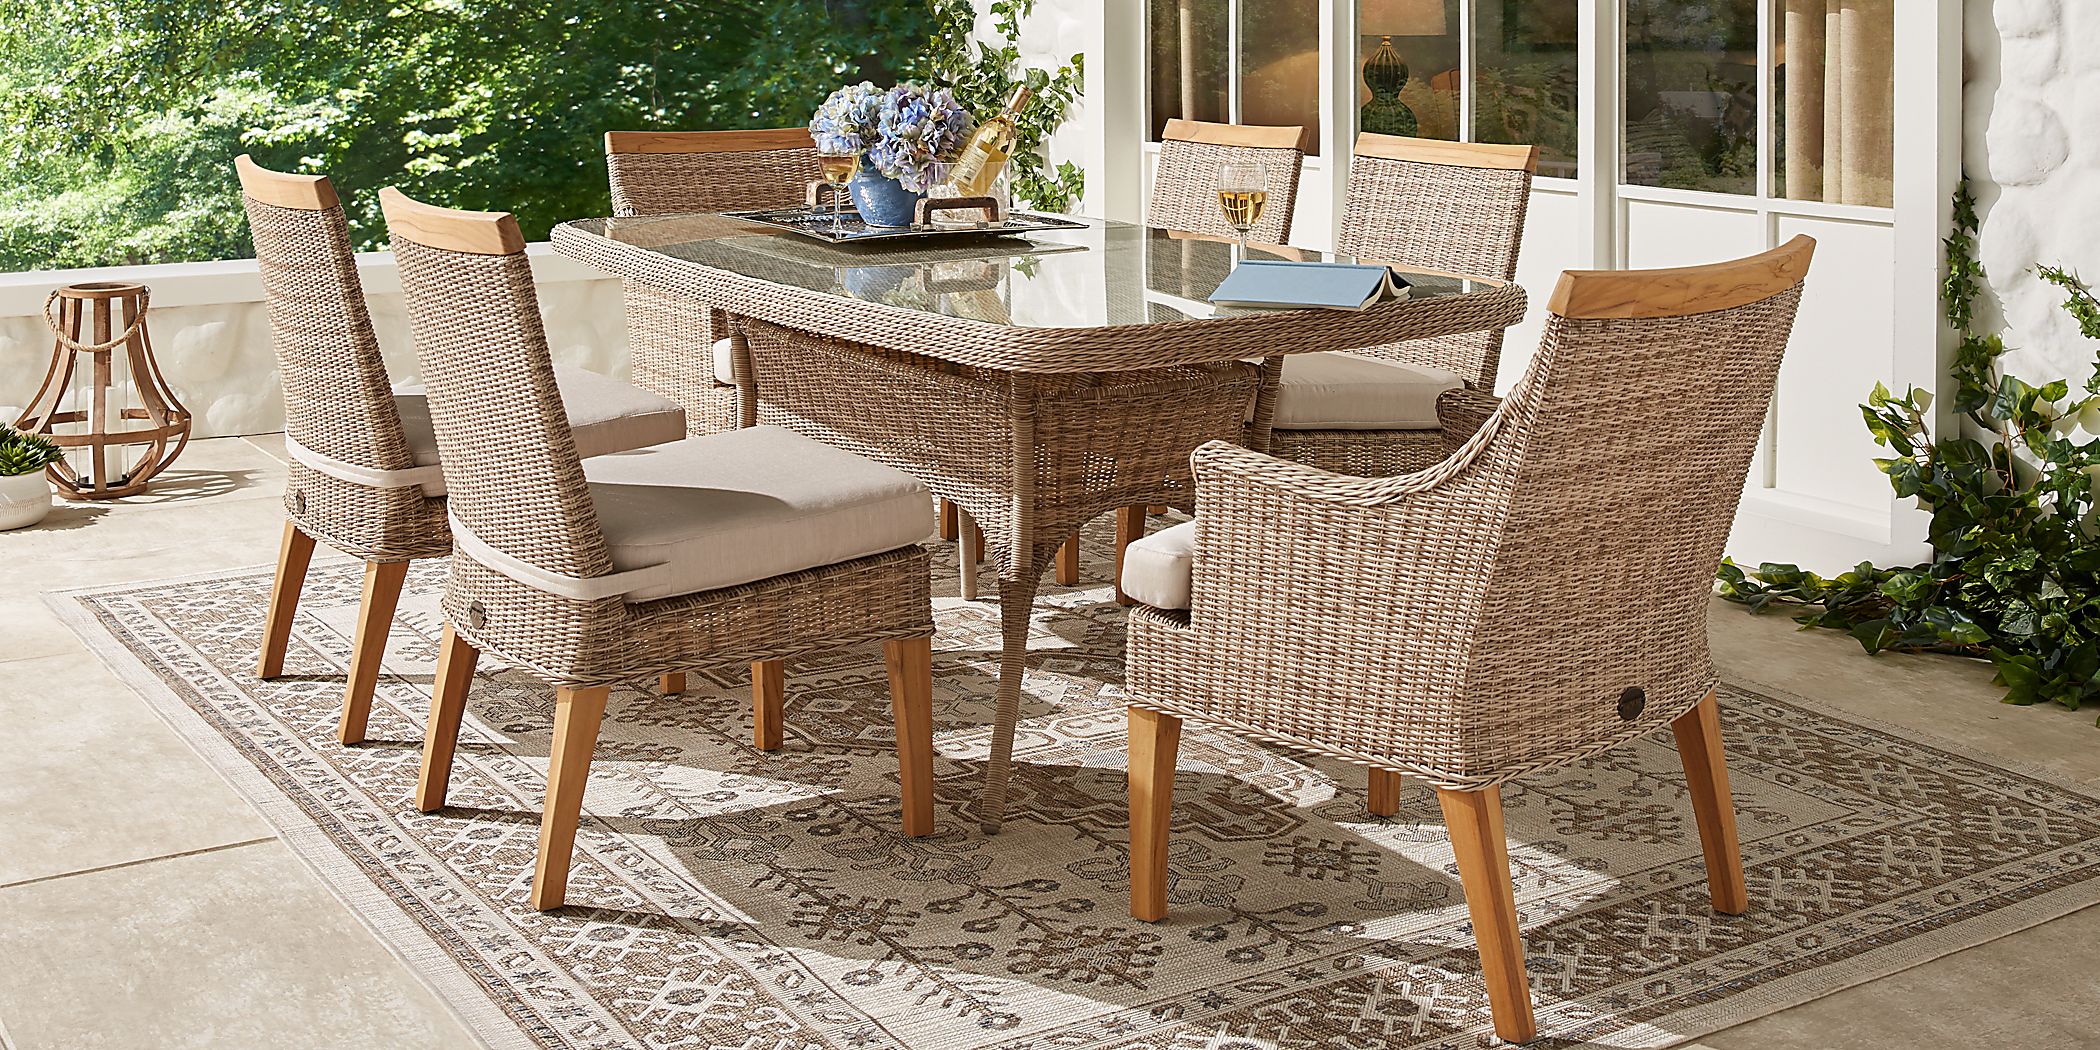 Cindy Crawford Home Hamptons Cove Gray 7 Pc Rectangle Outdoor Dining Set with Flax Cushions